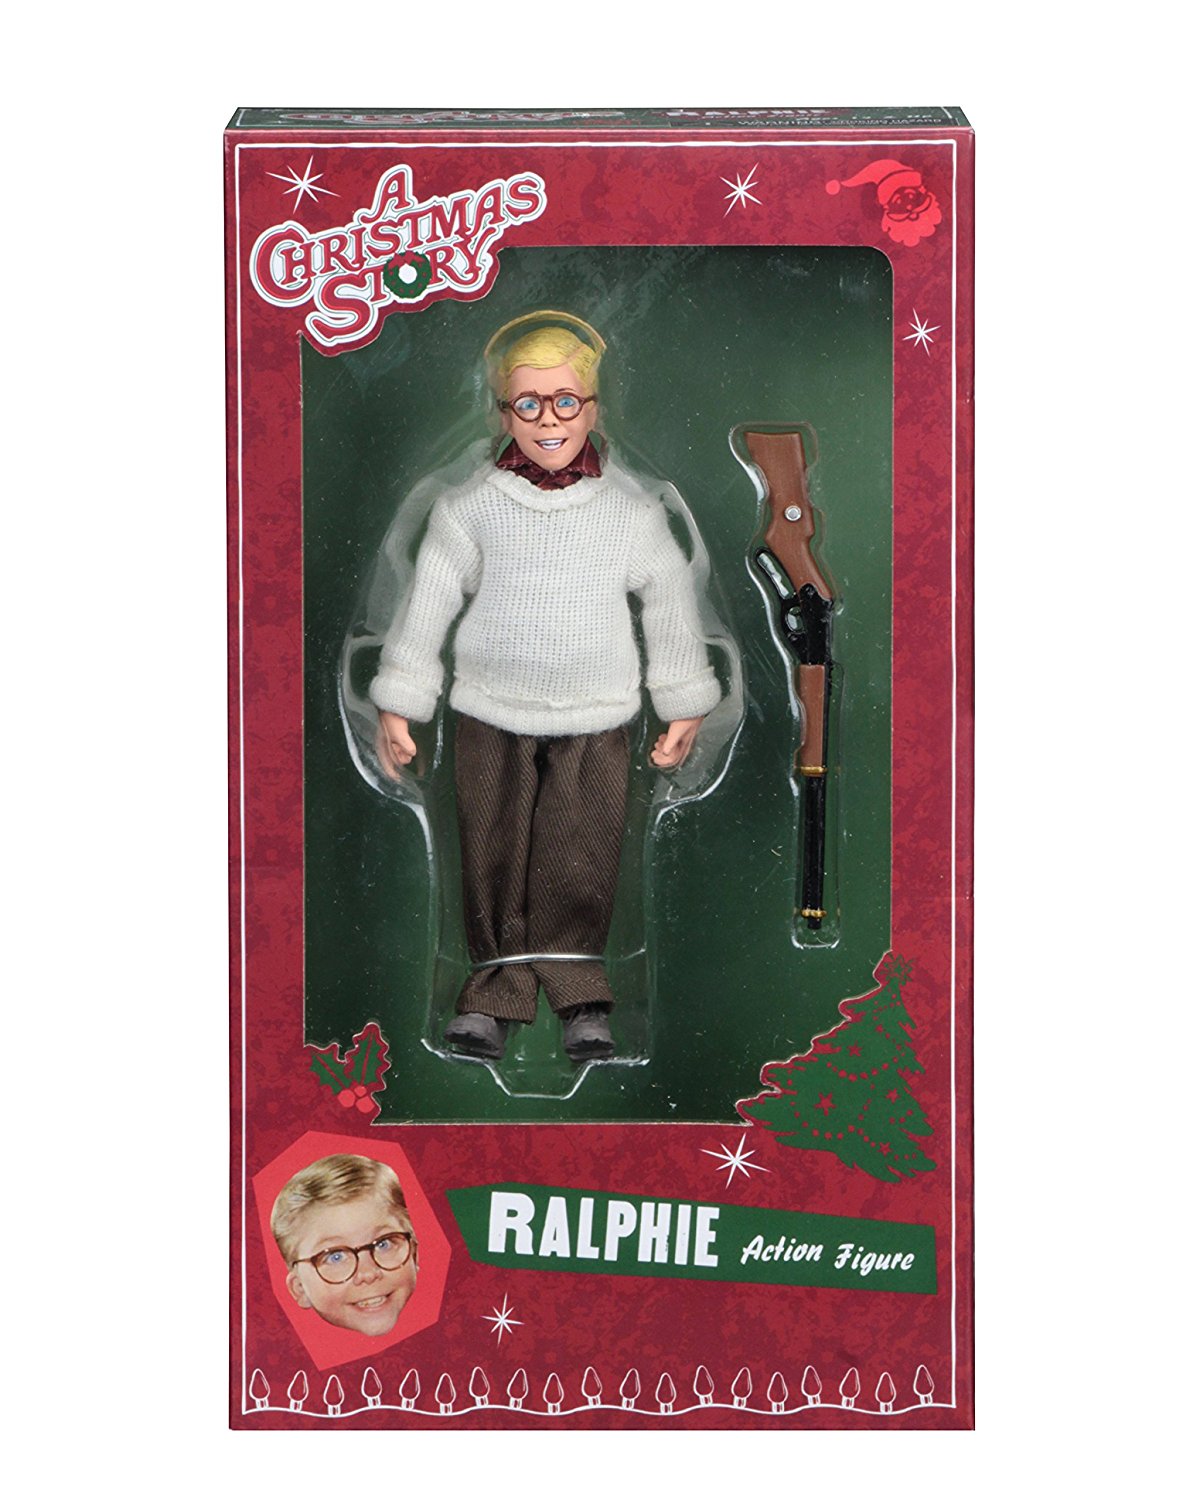 NECA A Christmas Story Ralphie 8-inch Clothed Action Figure - Collectors Row Inc.